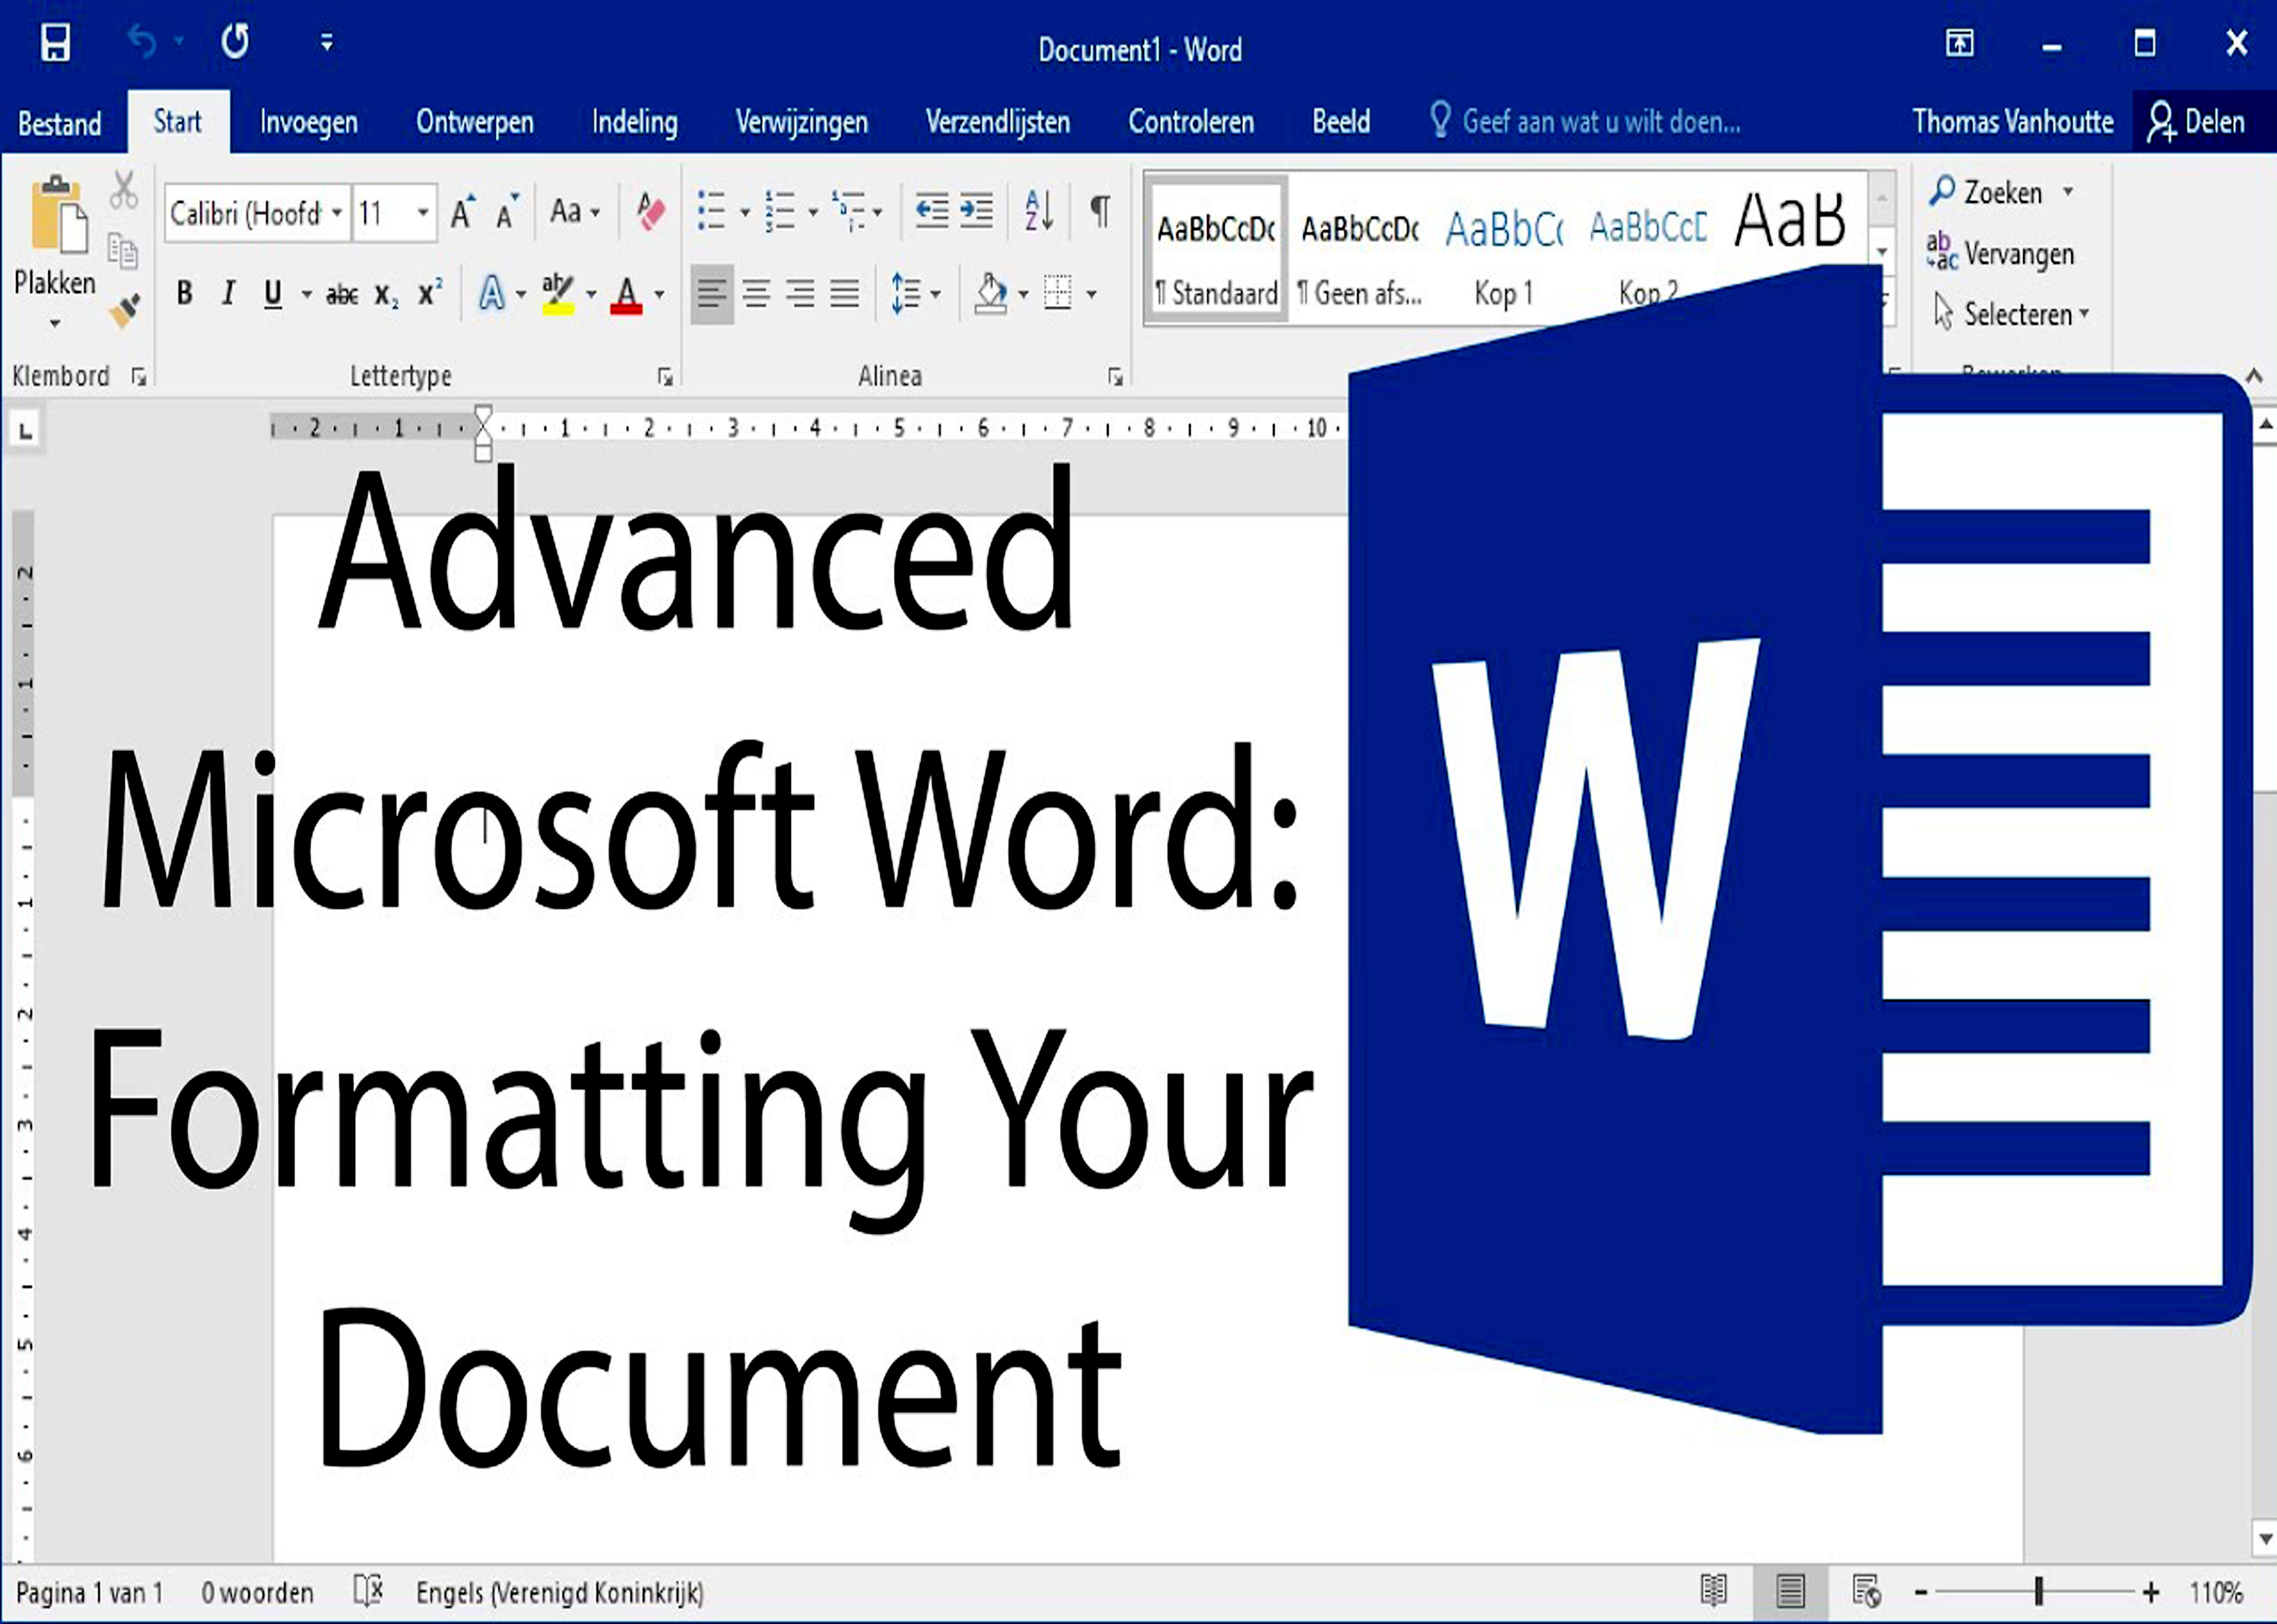 can i convert a scanned pdf to a word document for editing